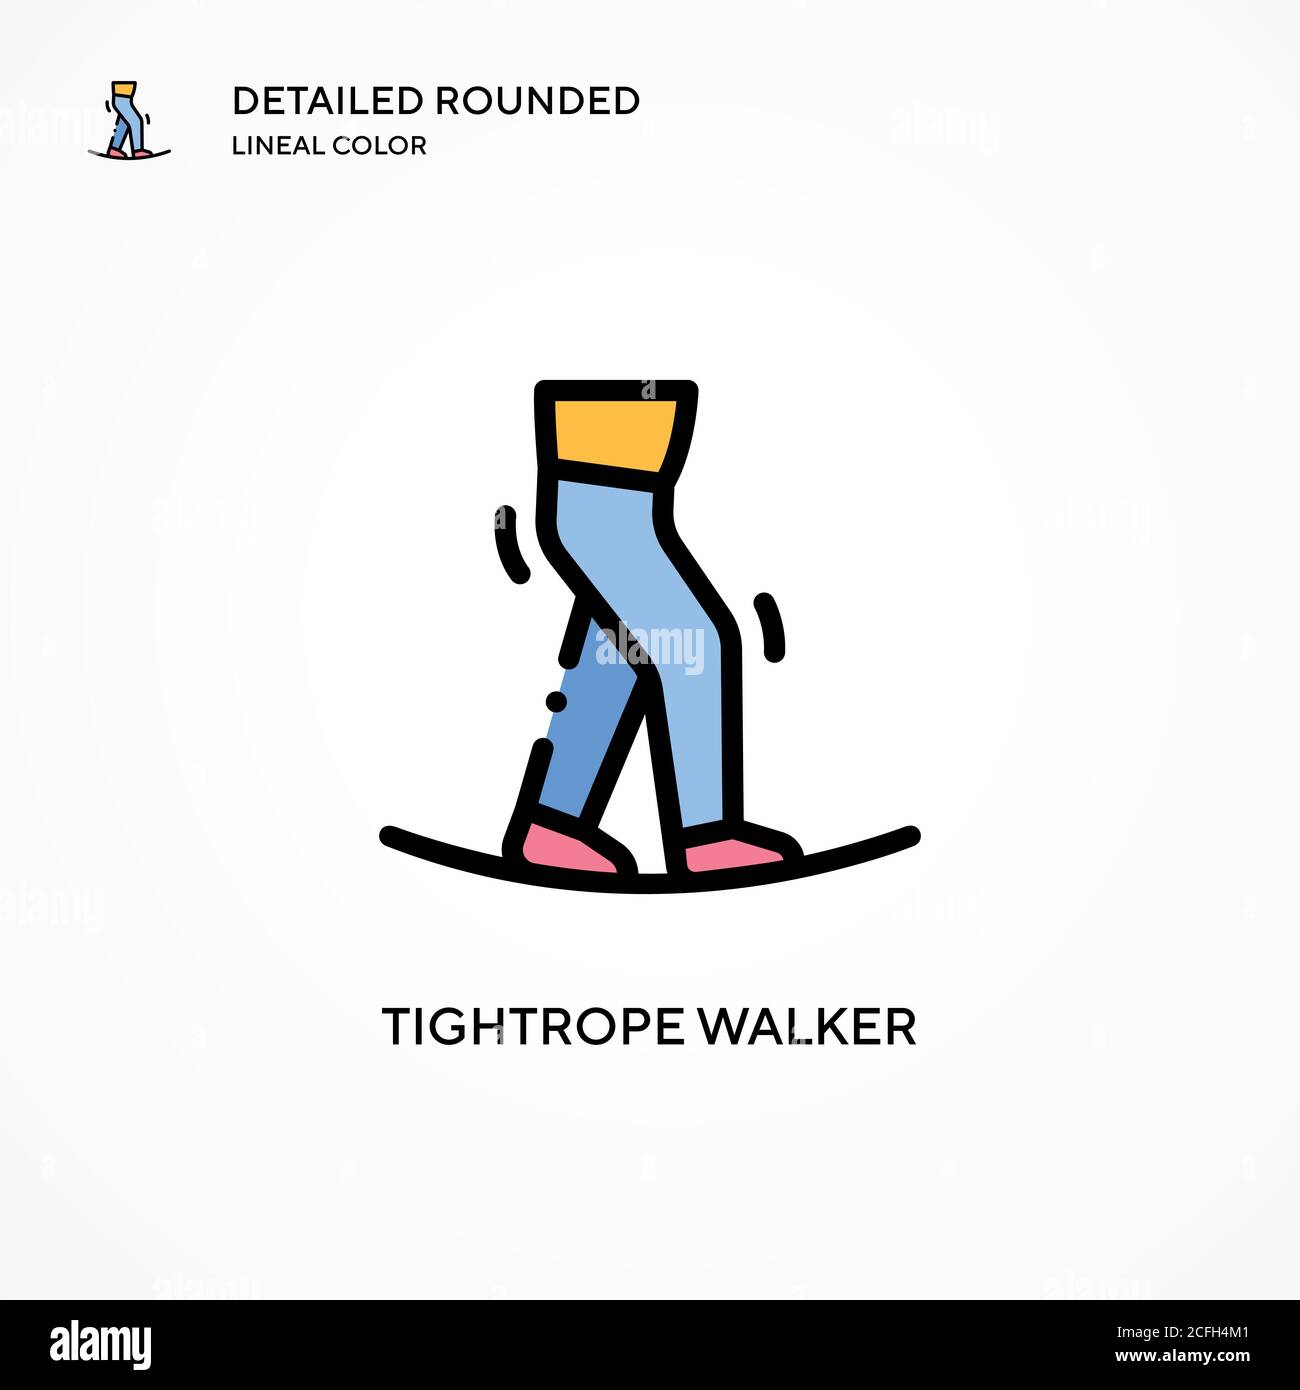 Tightrope walker vector icon. Modern vector illustration concepts. Easy to edit and customize. Stock Vector